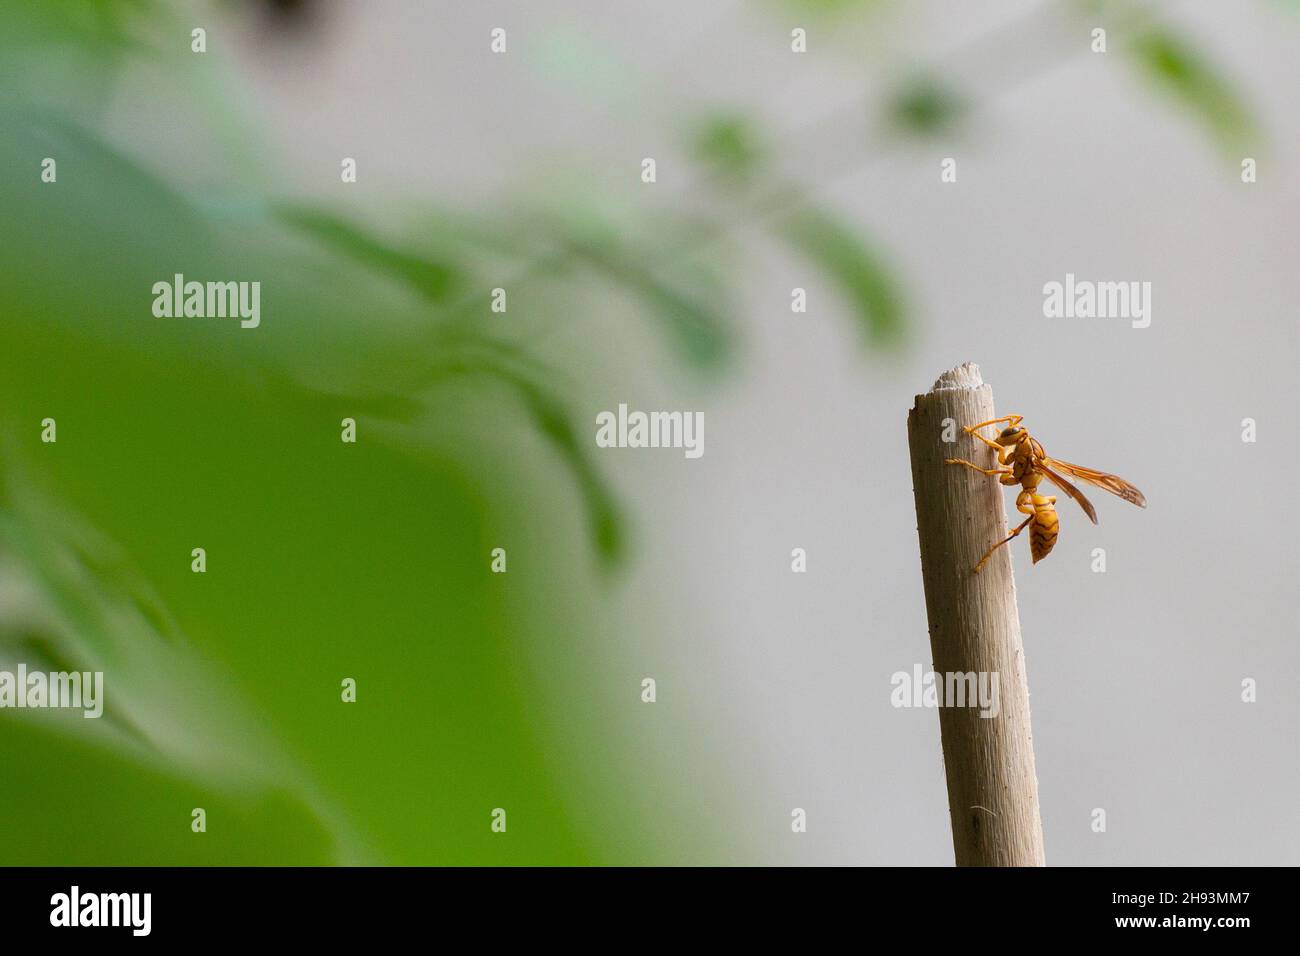 Vespula vulgaris, known as the common wasp, hanging from a stick in home made garden. Howrah, West Bengal, India. Stock Photo